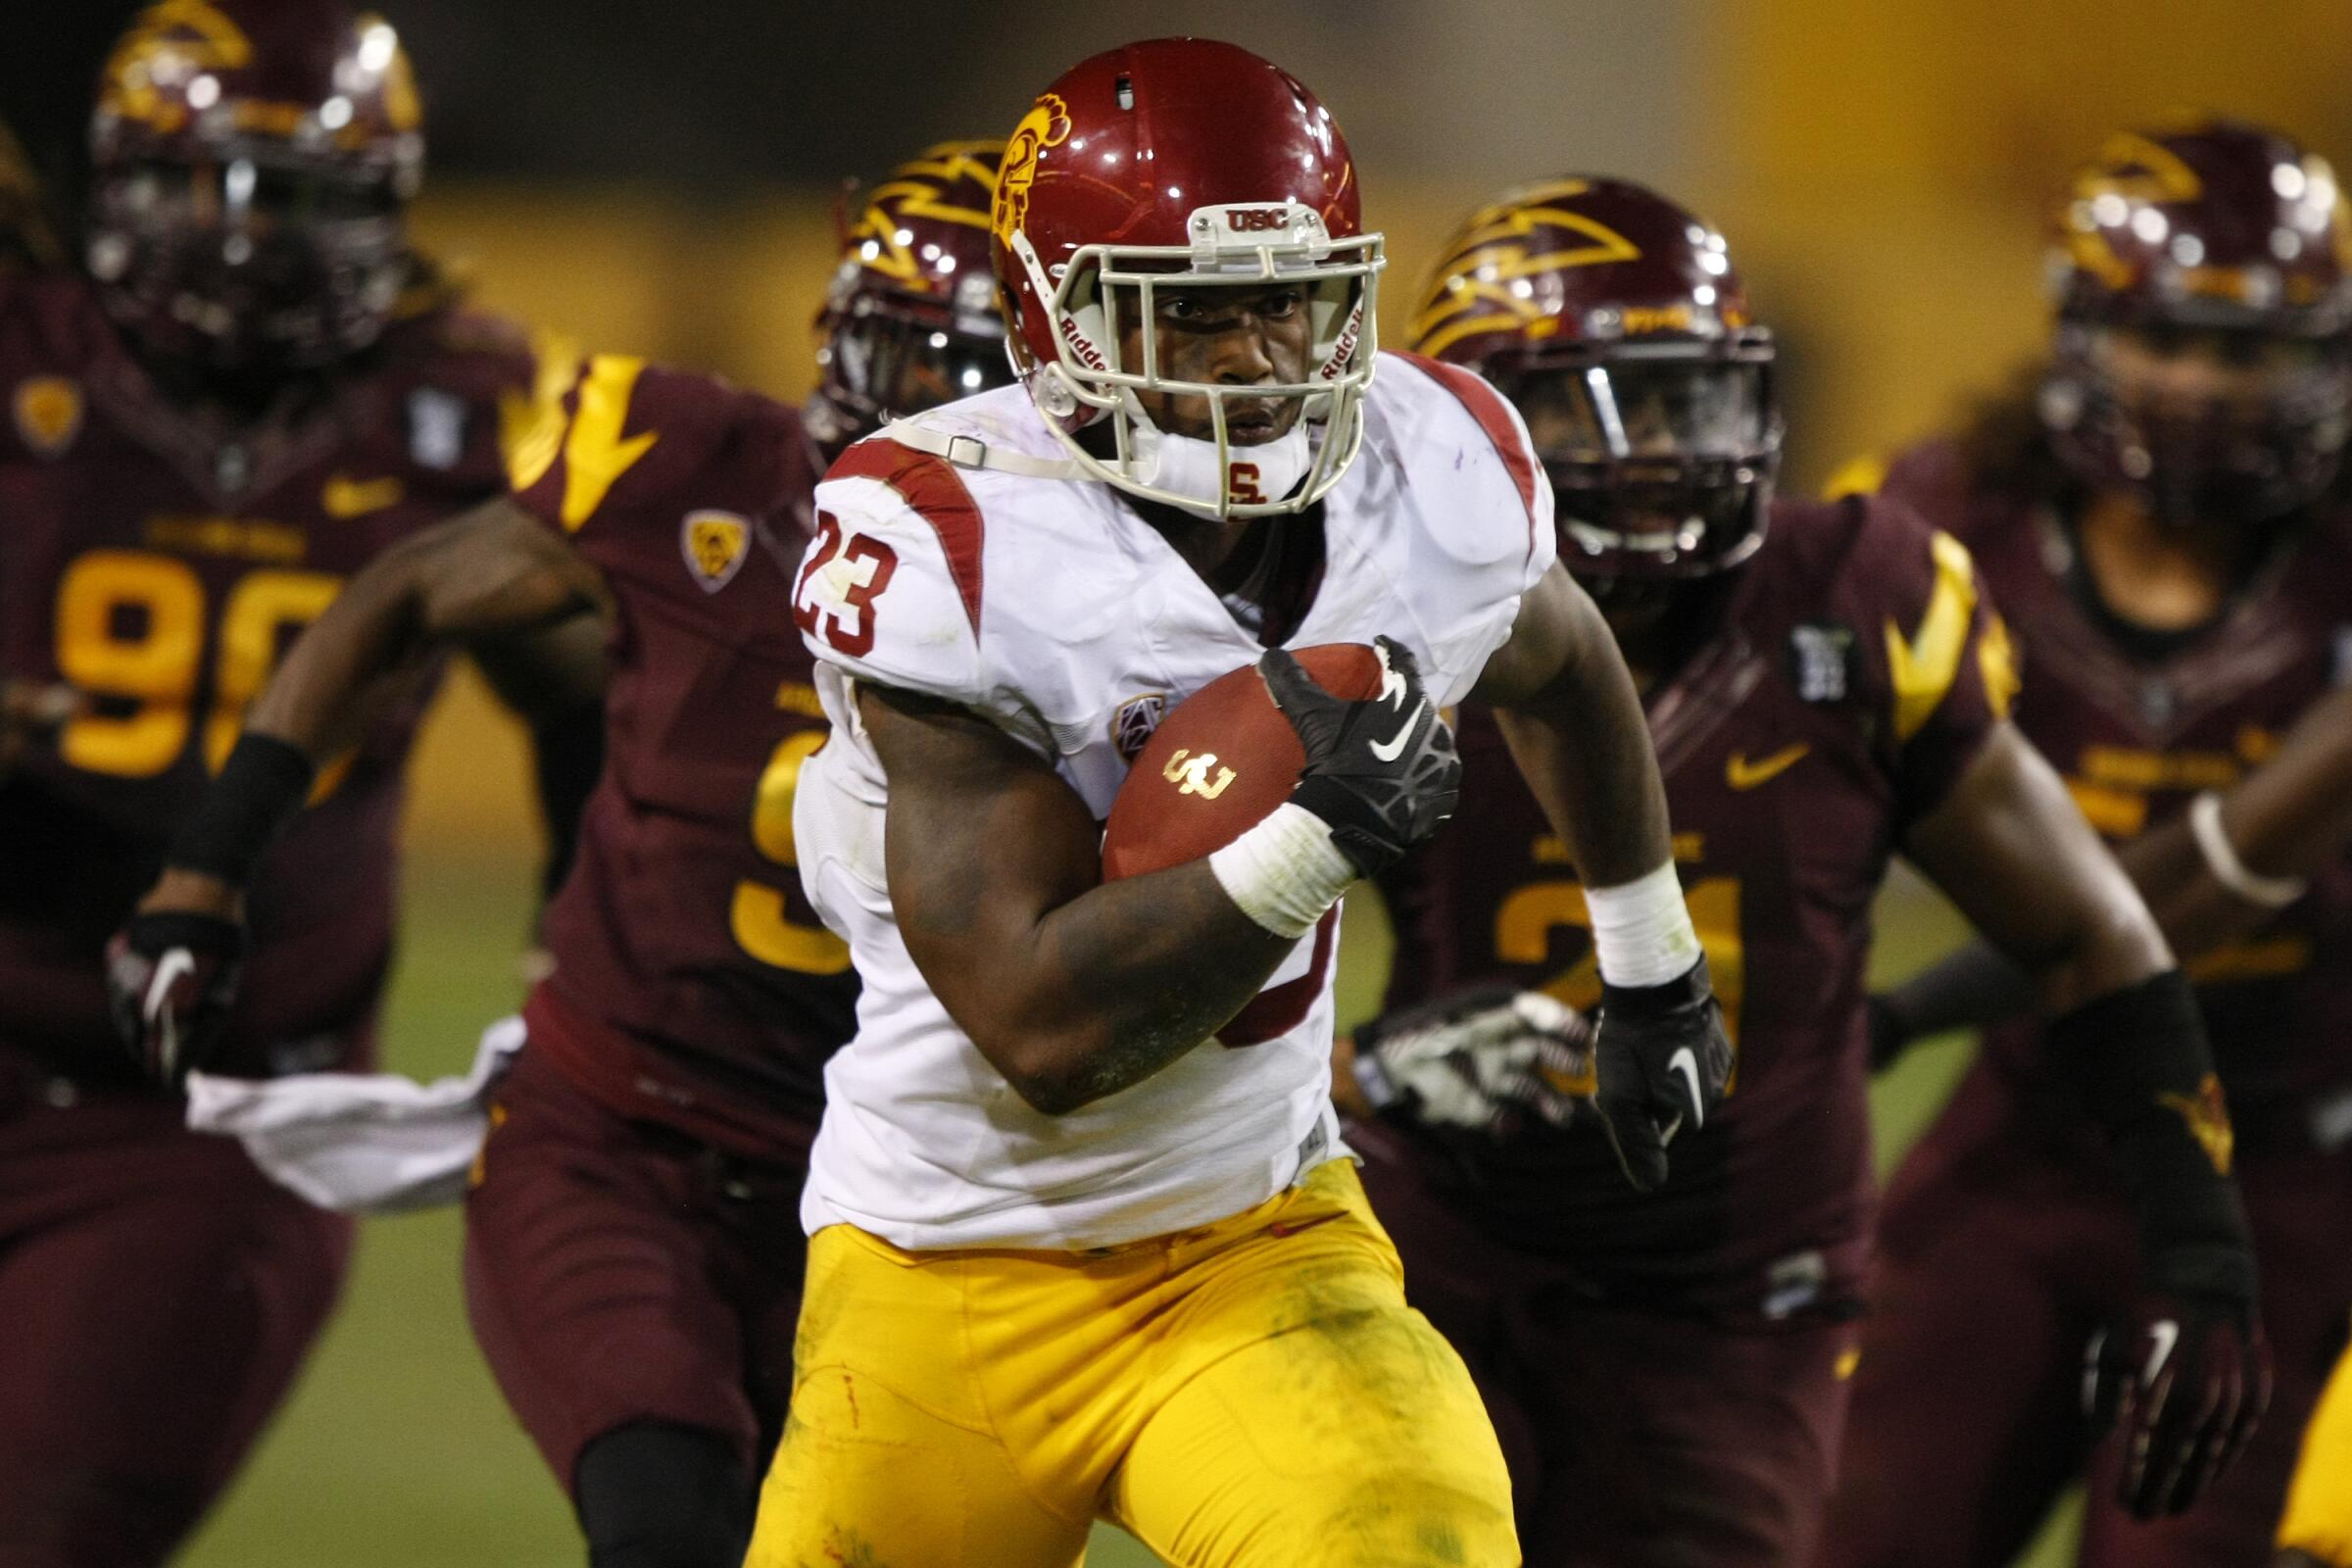 USC running back Tre Madden scores a touchdown against Arizona State.